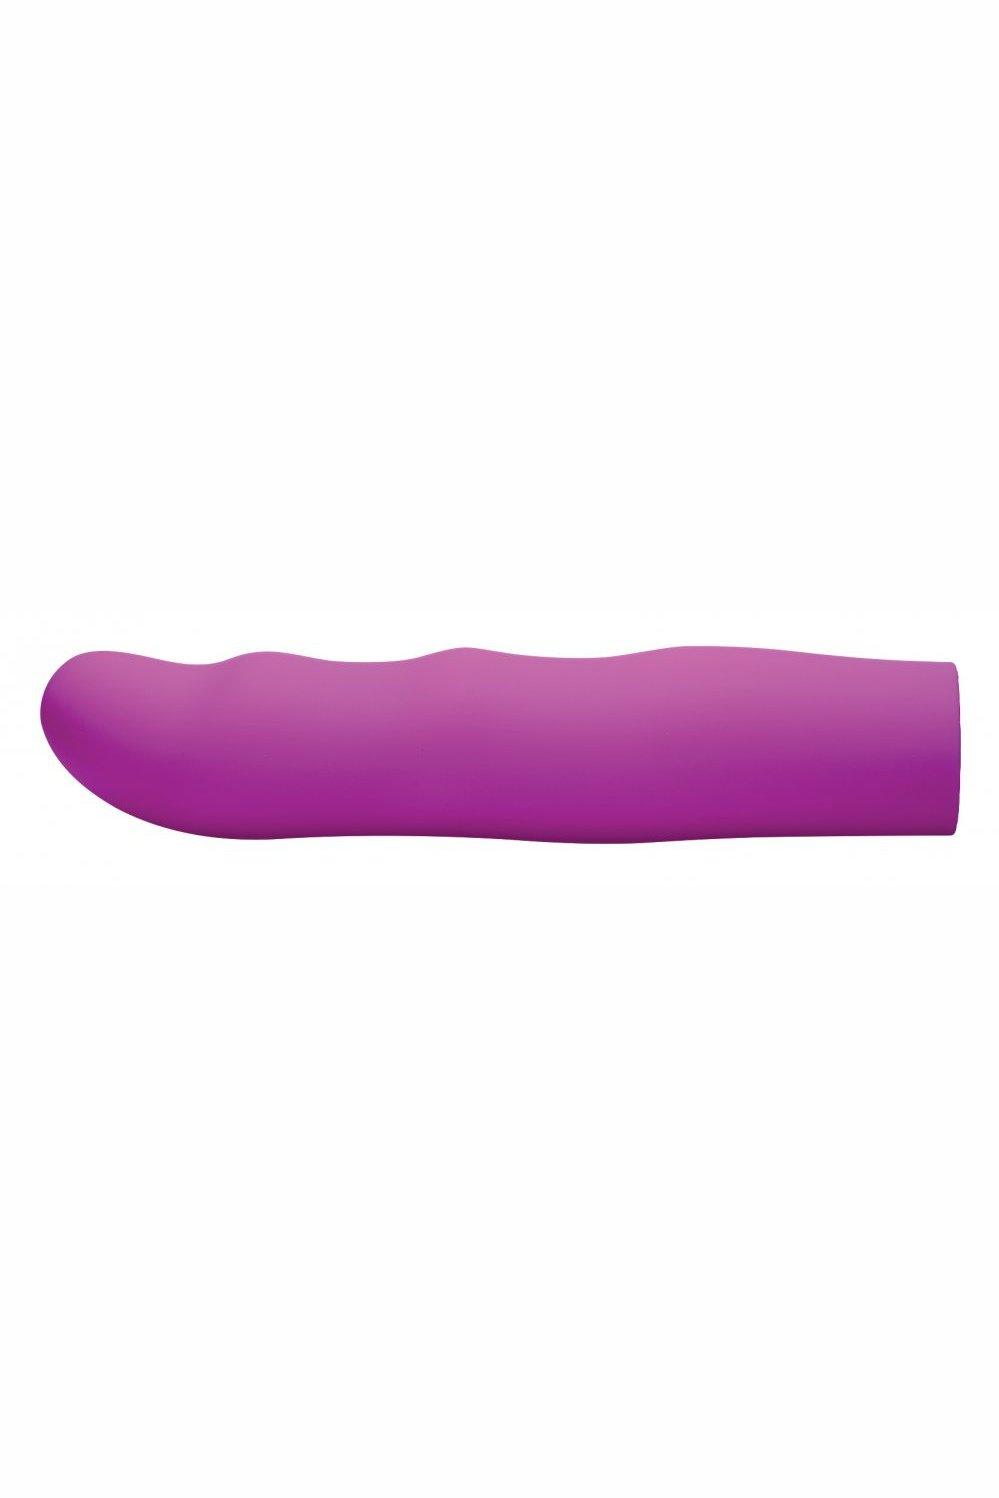 4-In-1 XL Silicone Bullet and Sleeves Kit - Sex On the Go